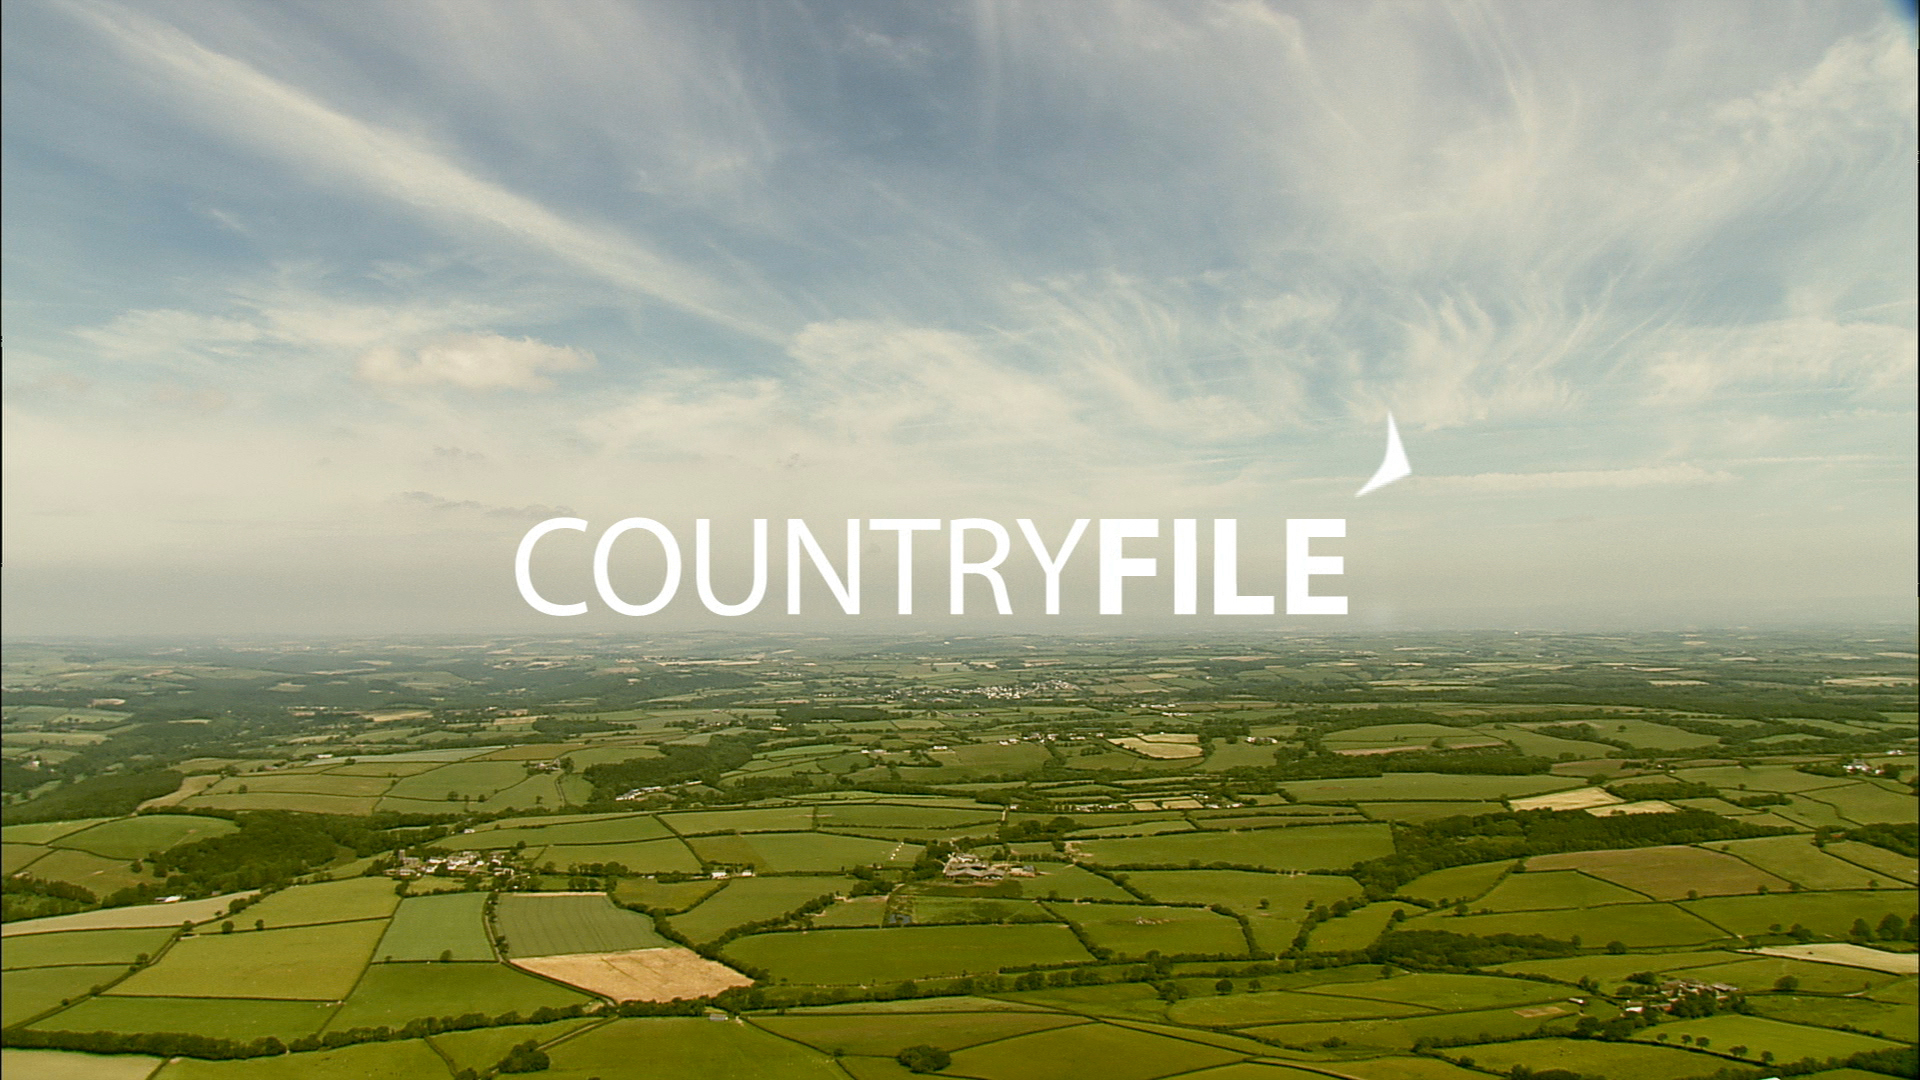 24 miles. Countryfile. Countryfile the album 1998.